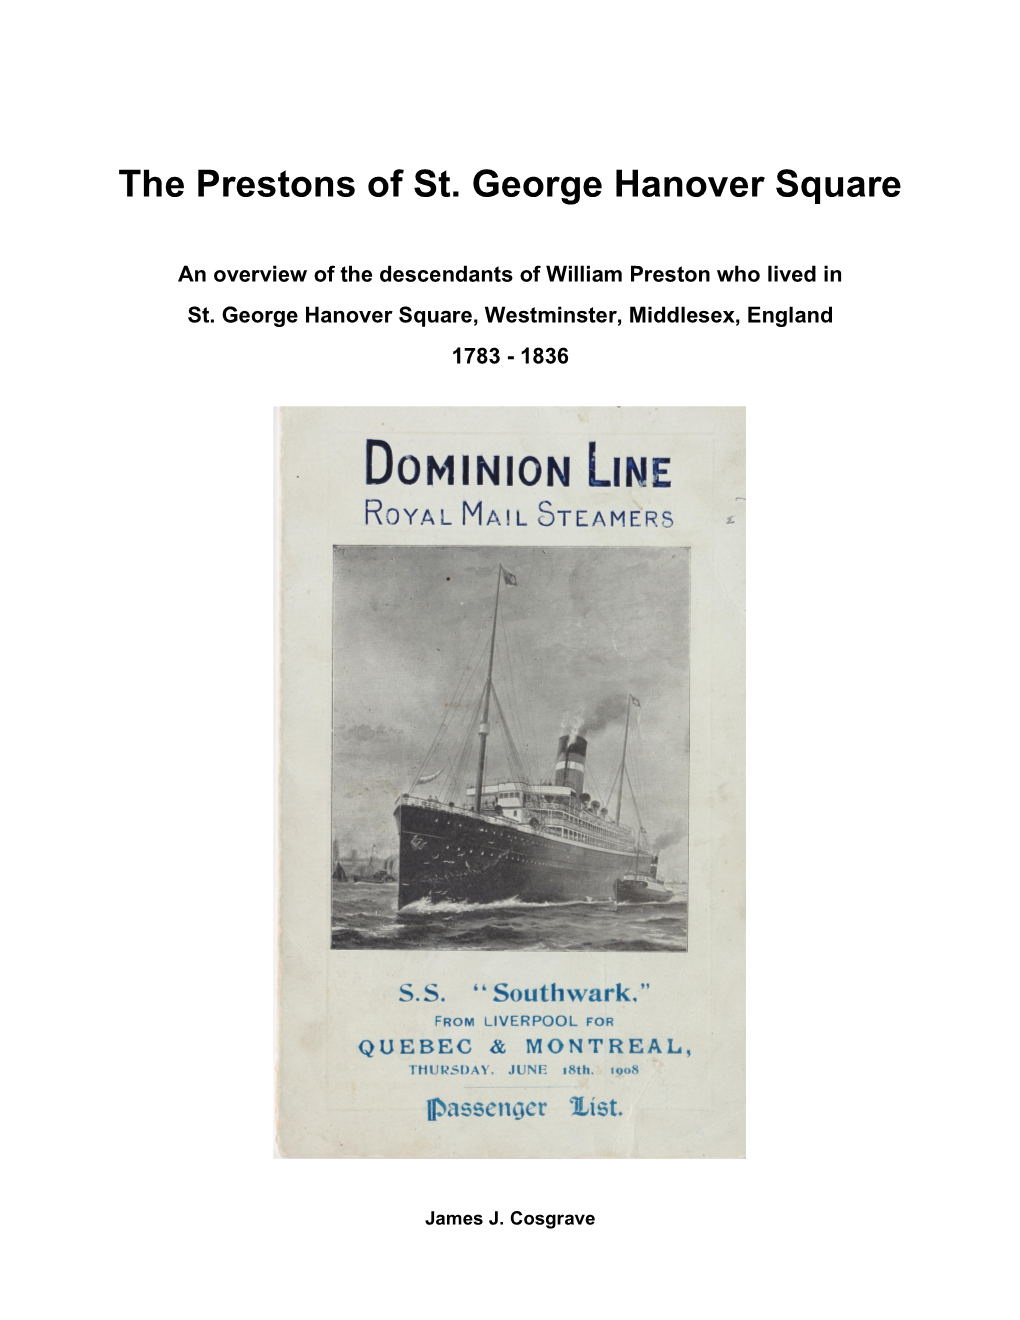 The Prestons of St. George Hanover Square